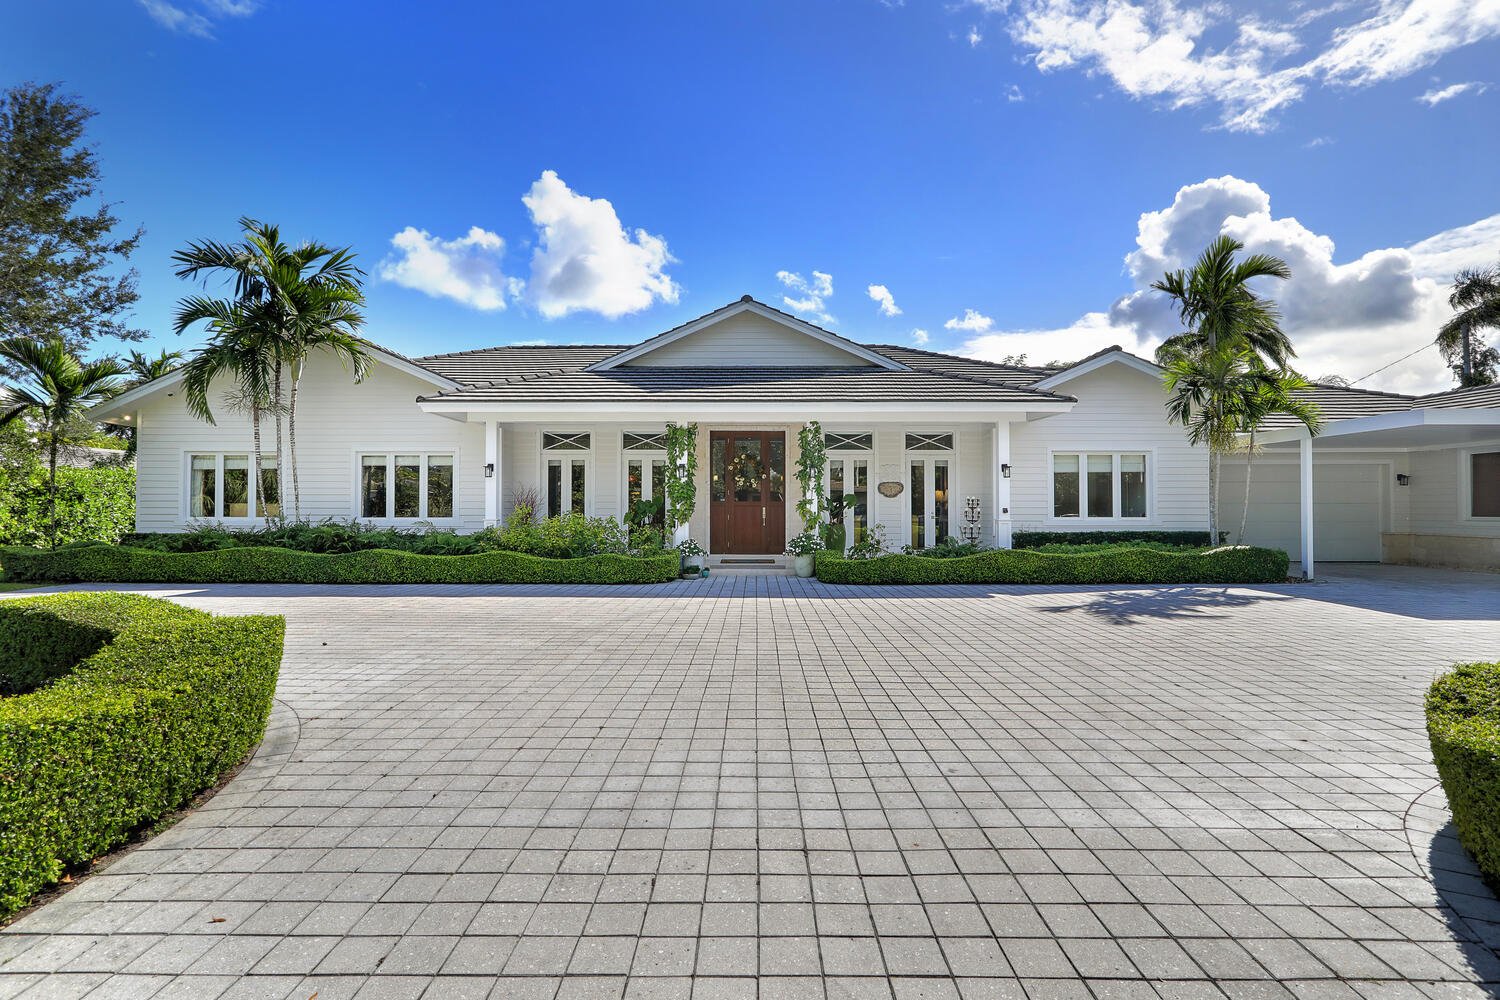 Master Brokers Forum Listing: Check Out This 'Hamptons Meets Key West' Style North Pinecrest Home Asking $5.8 Million 5.jpg